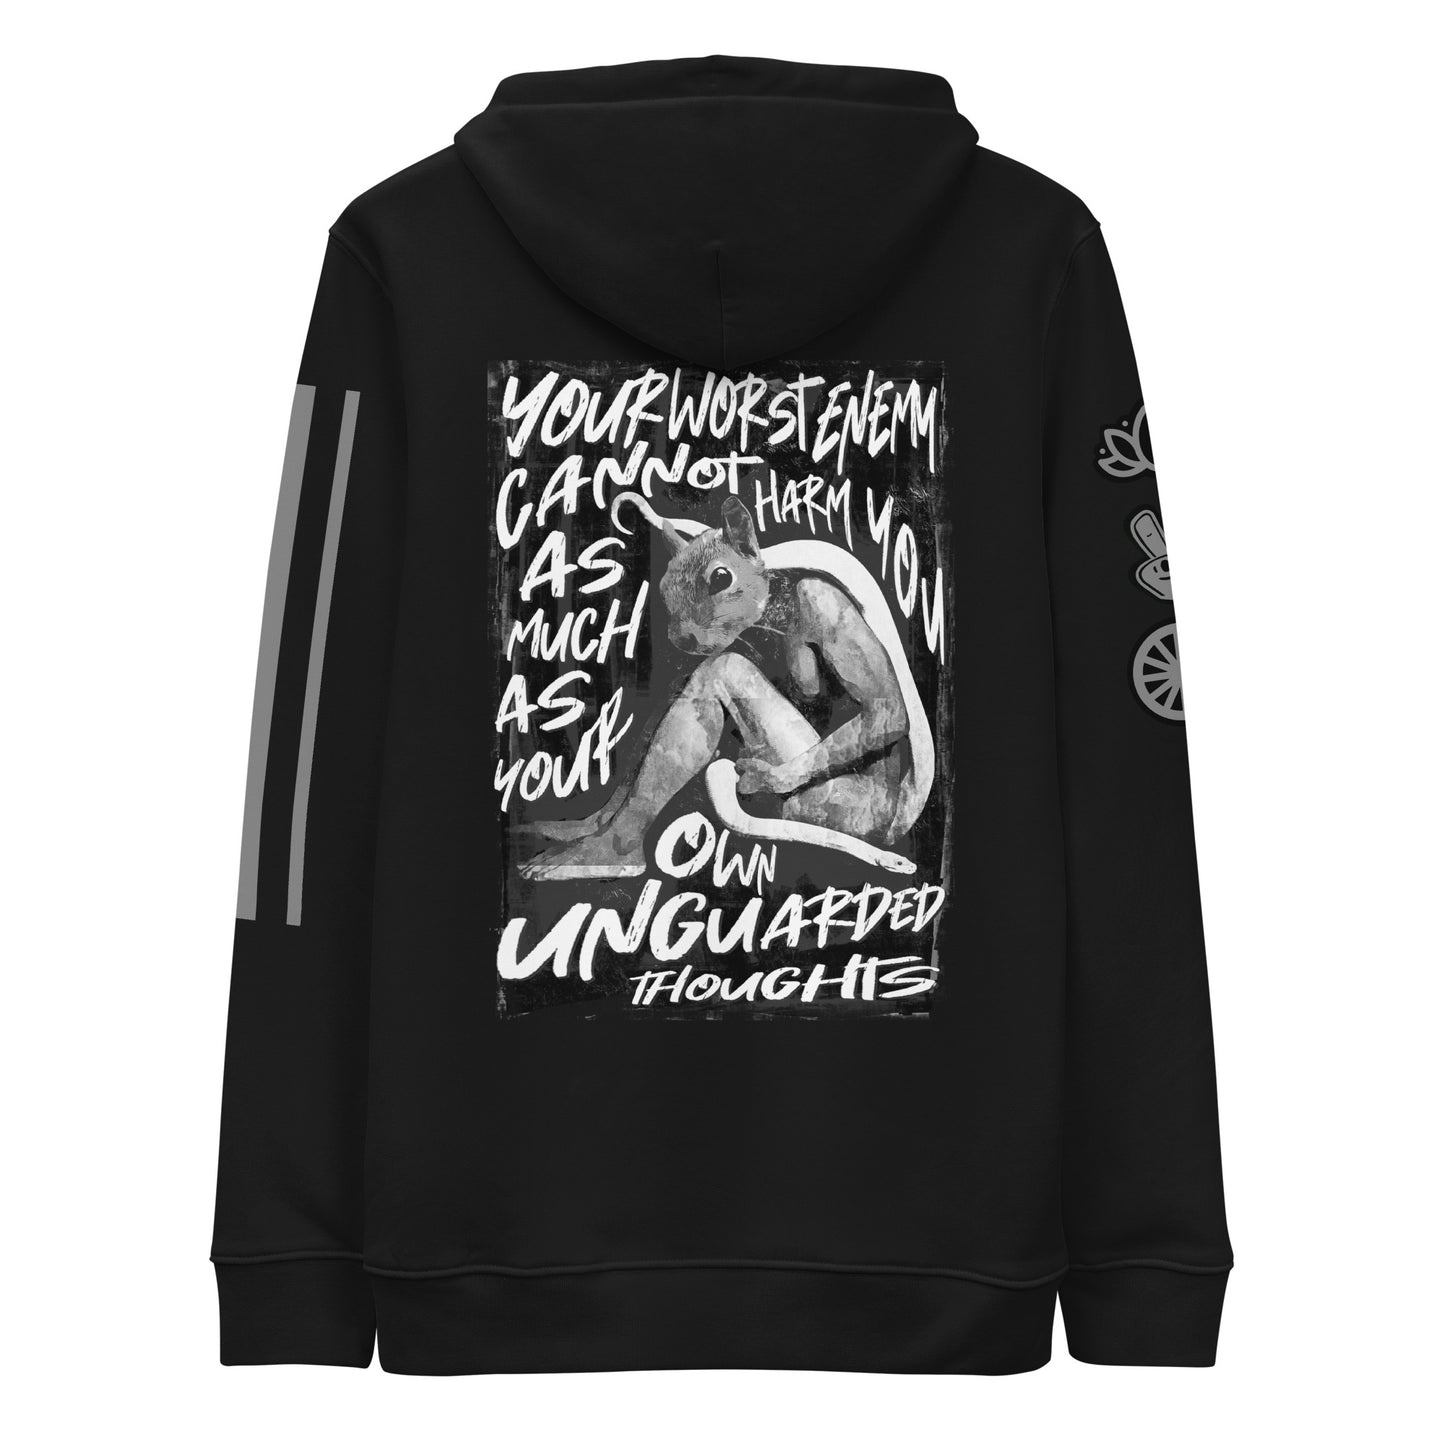 "Mono Unguarded Thoughts" Unisex Eco-friendly Hoodie